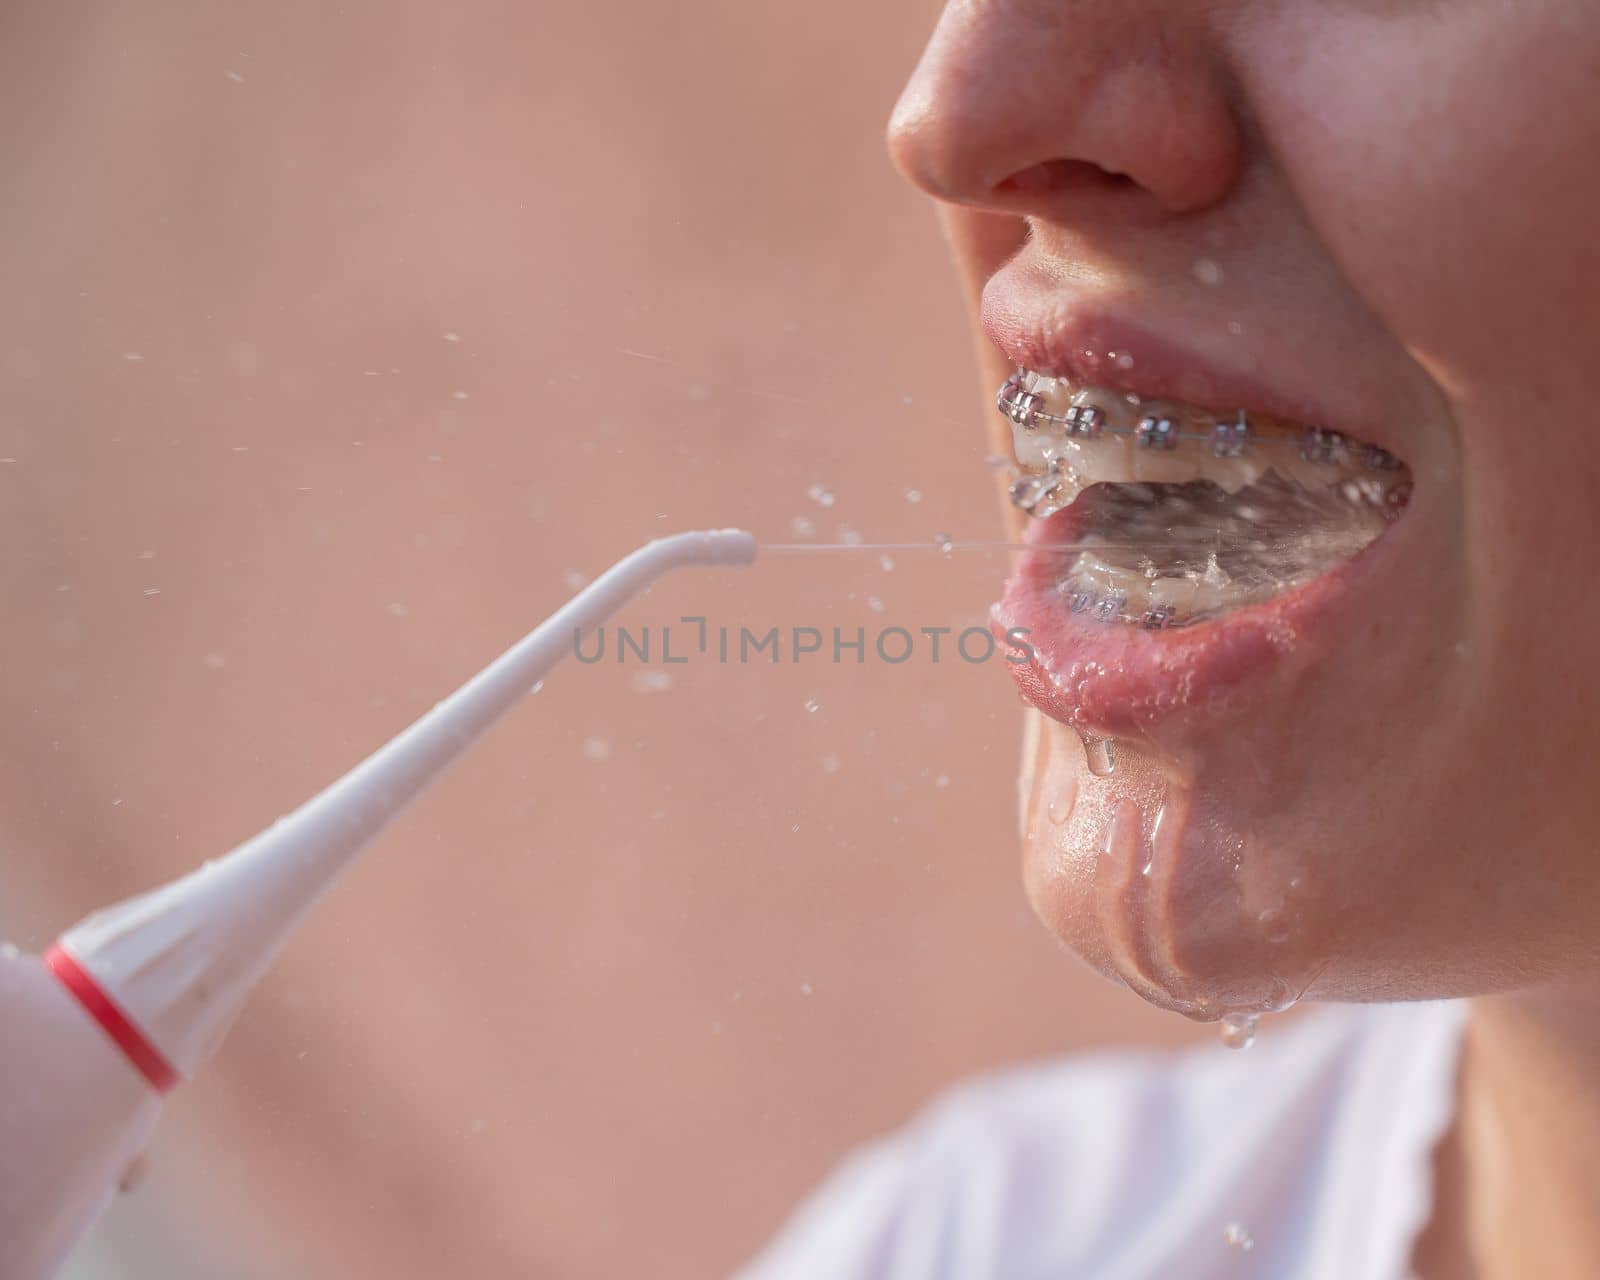 A woman with braces on her teeth uses an irrigator. Close-up portrait